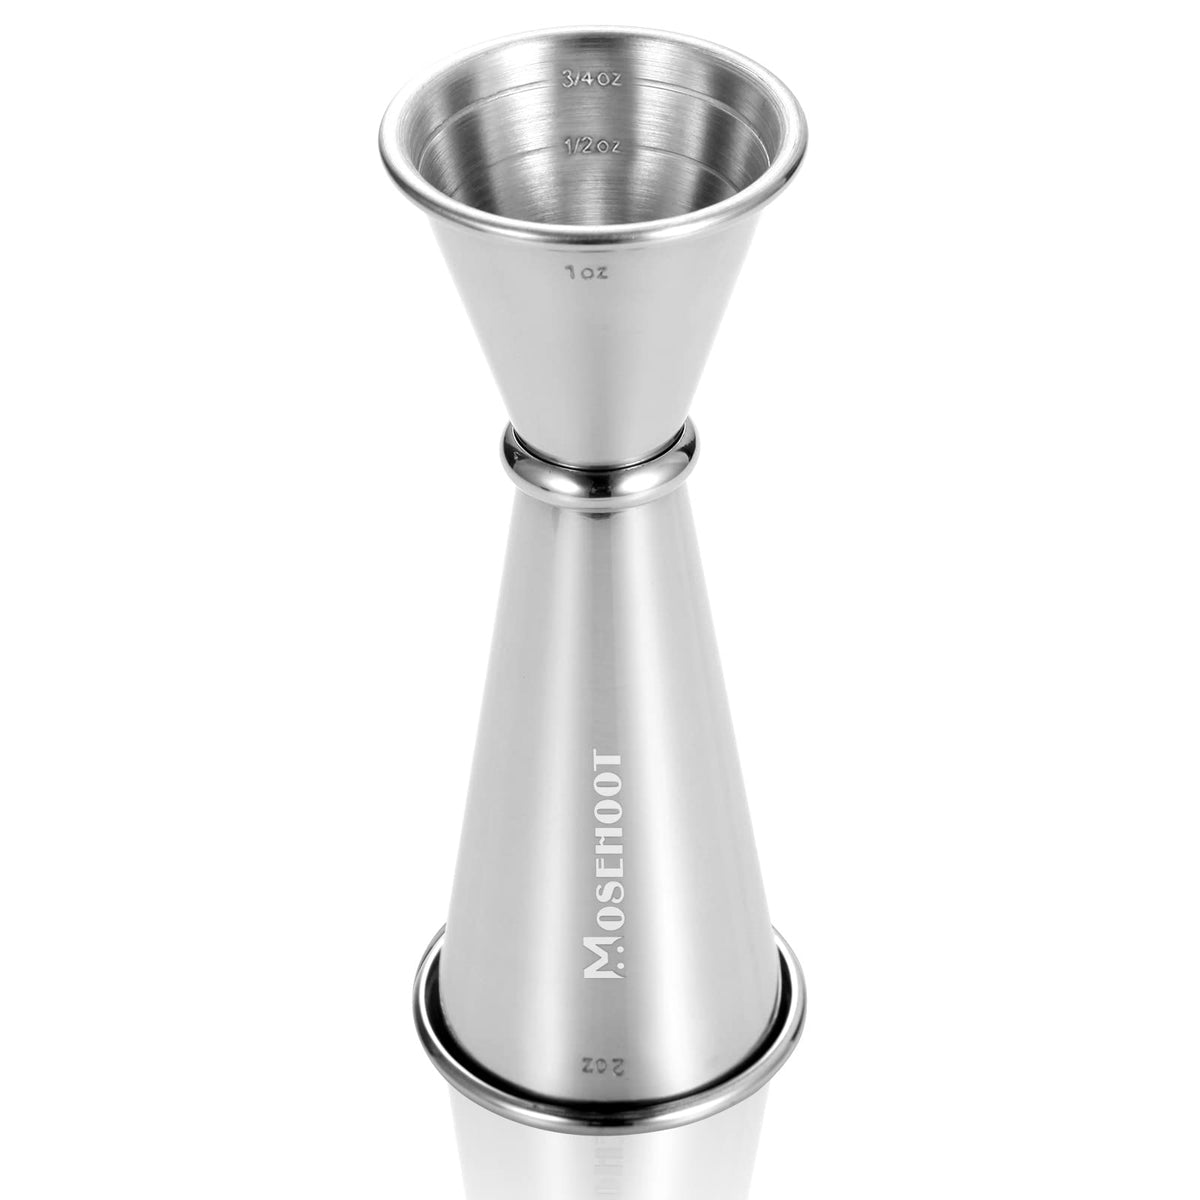 Premium Double Cocktail Jigger, 1oz/2oz Made from Stainless Steel 304